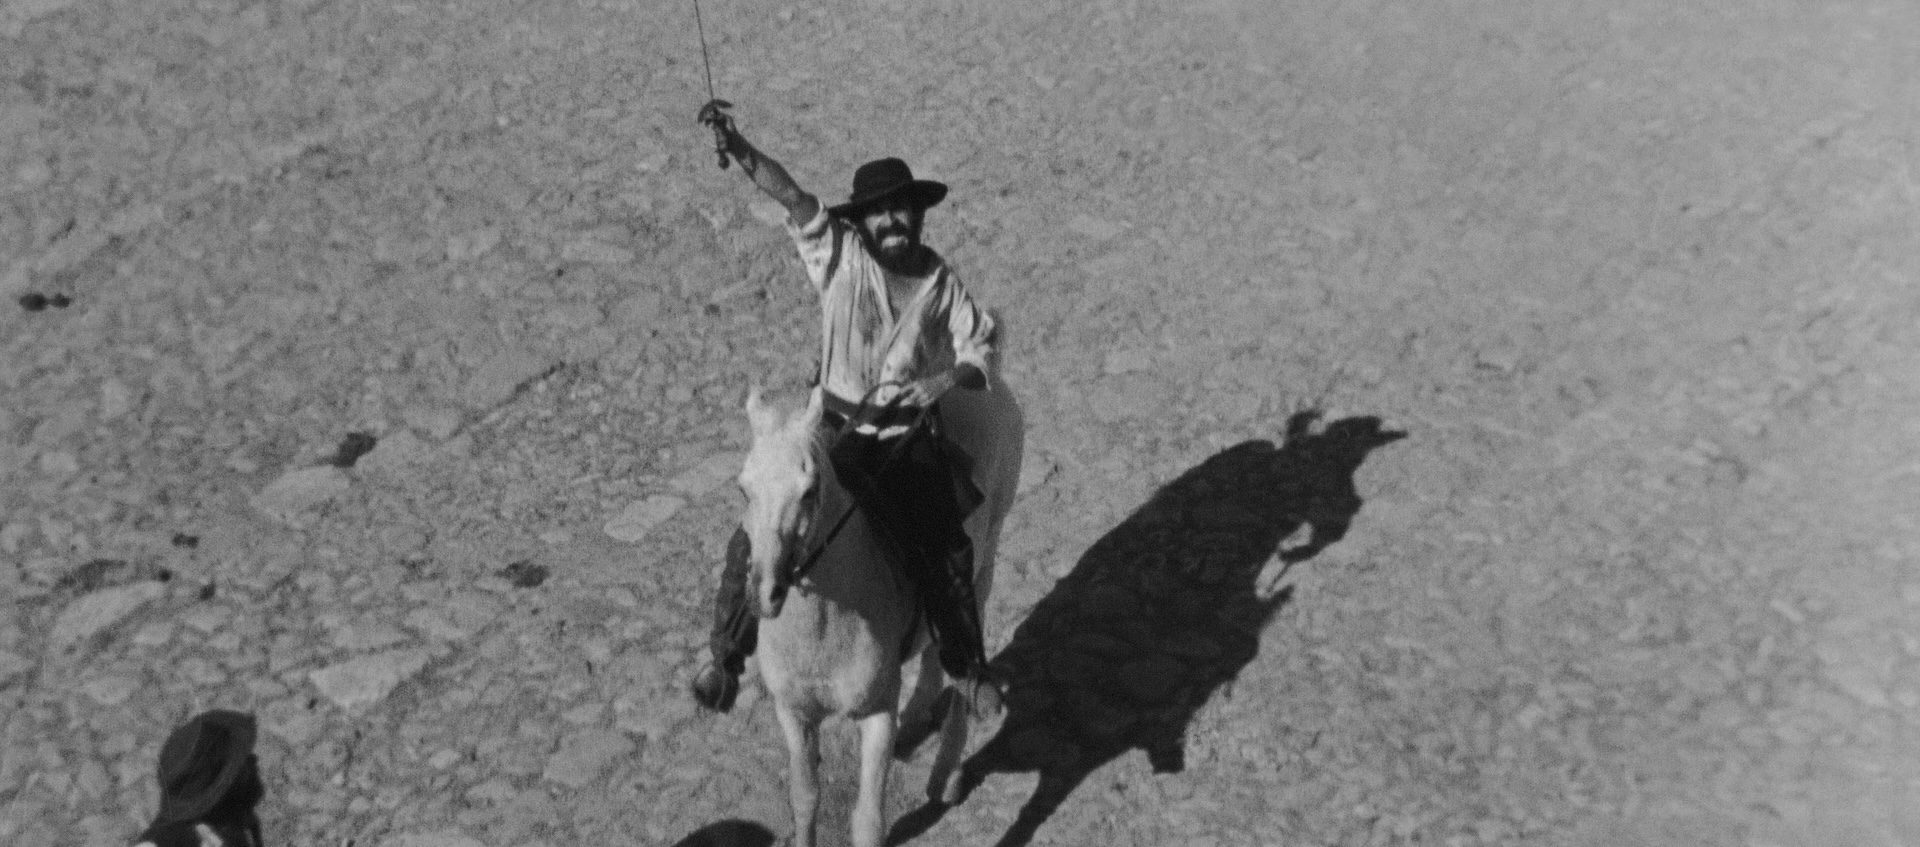 Black and white film still of a man sitting on a horse in the desert and holding a sword upward.